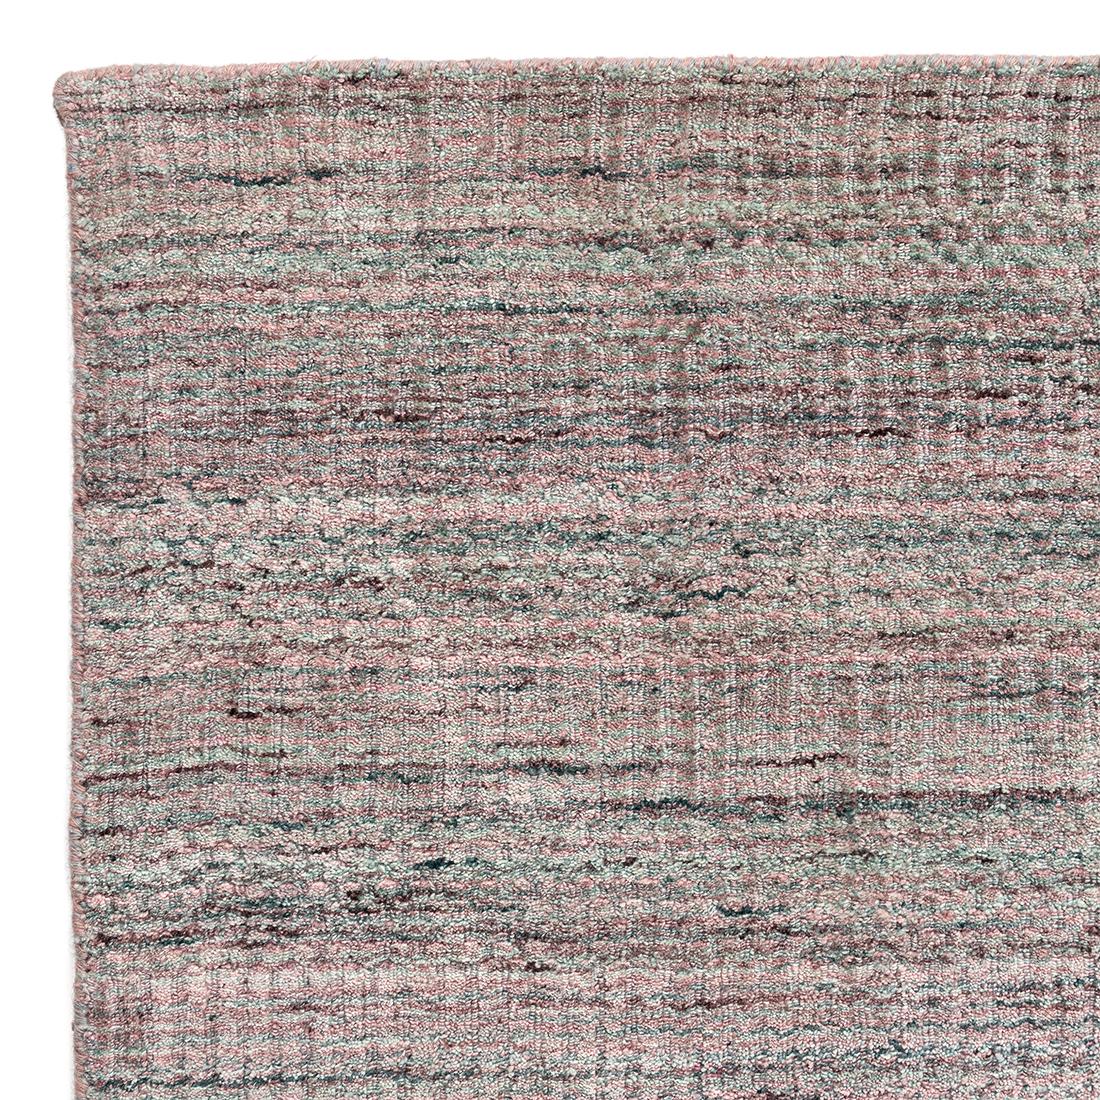 Simplicity Pink Turquoise contemporary handwoven rug, 9'2 x 12'. We call this our “Simplicity” Line, but a closer look reveals that it is not so simple. Yes, we have eliminated borders, yes the pattern is infinite, yes it is purely geometric. But